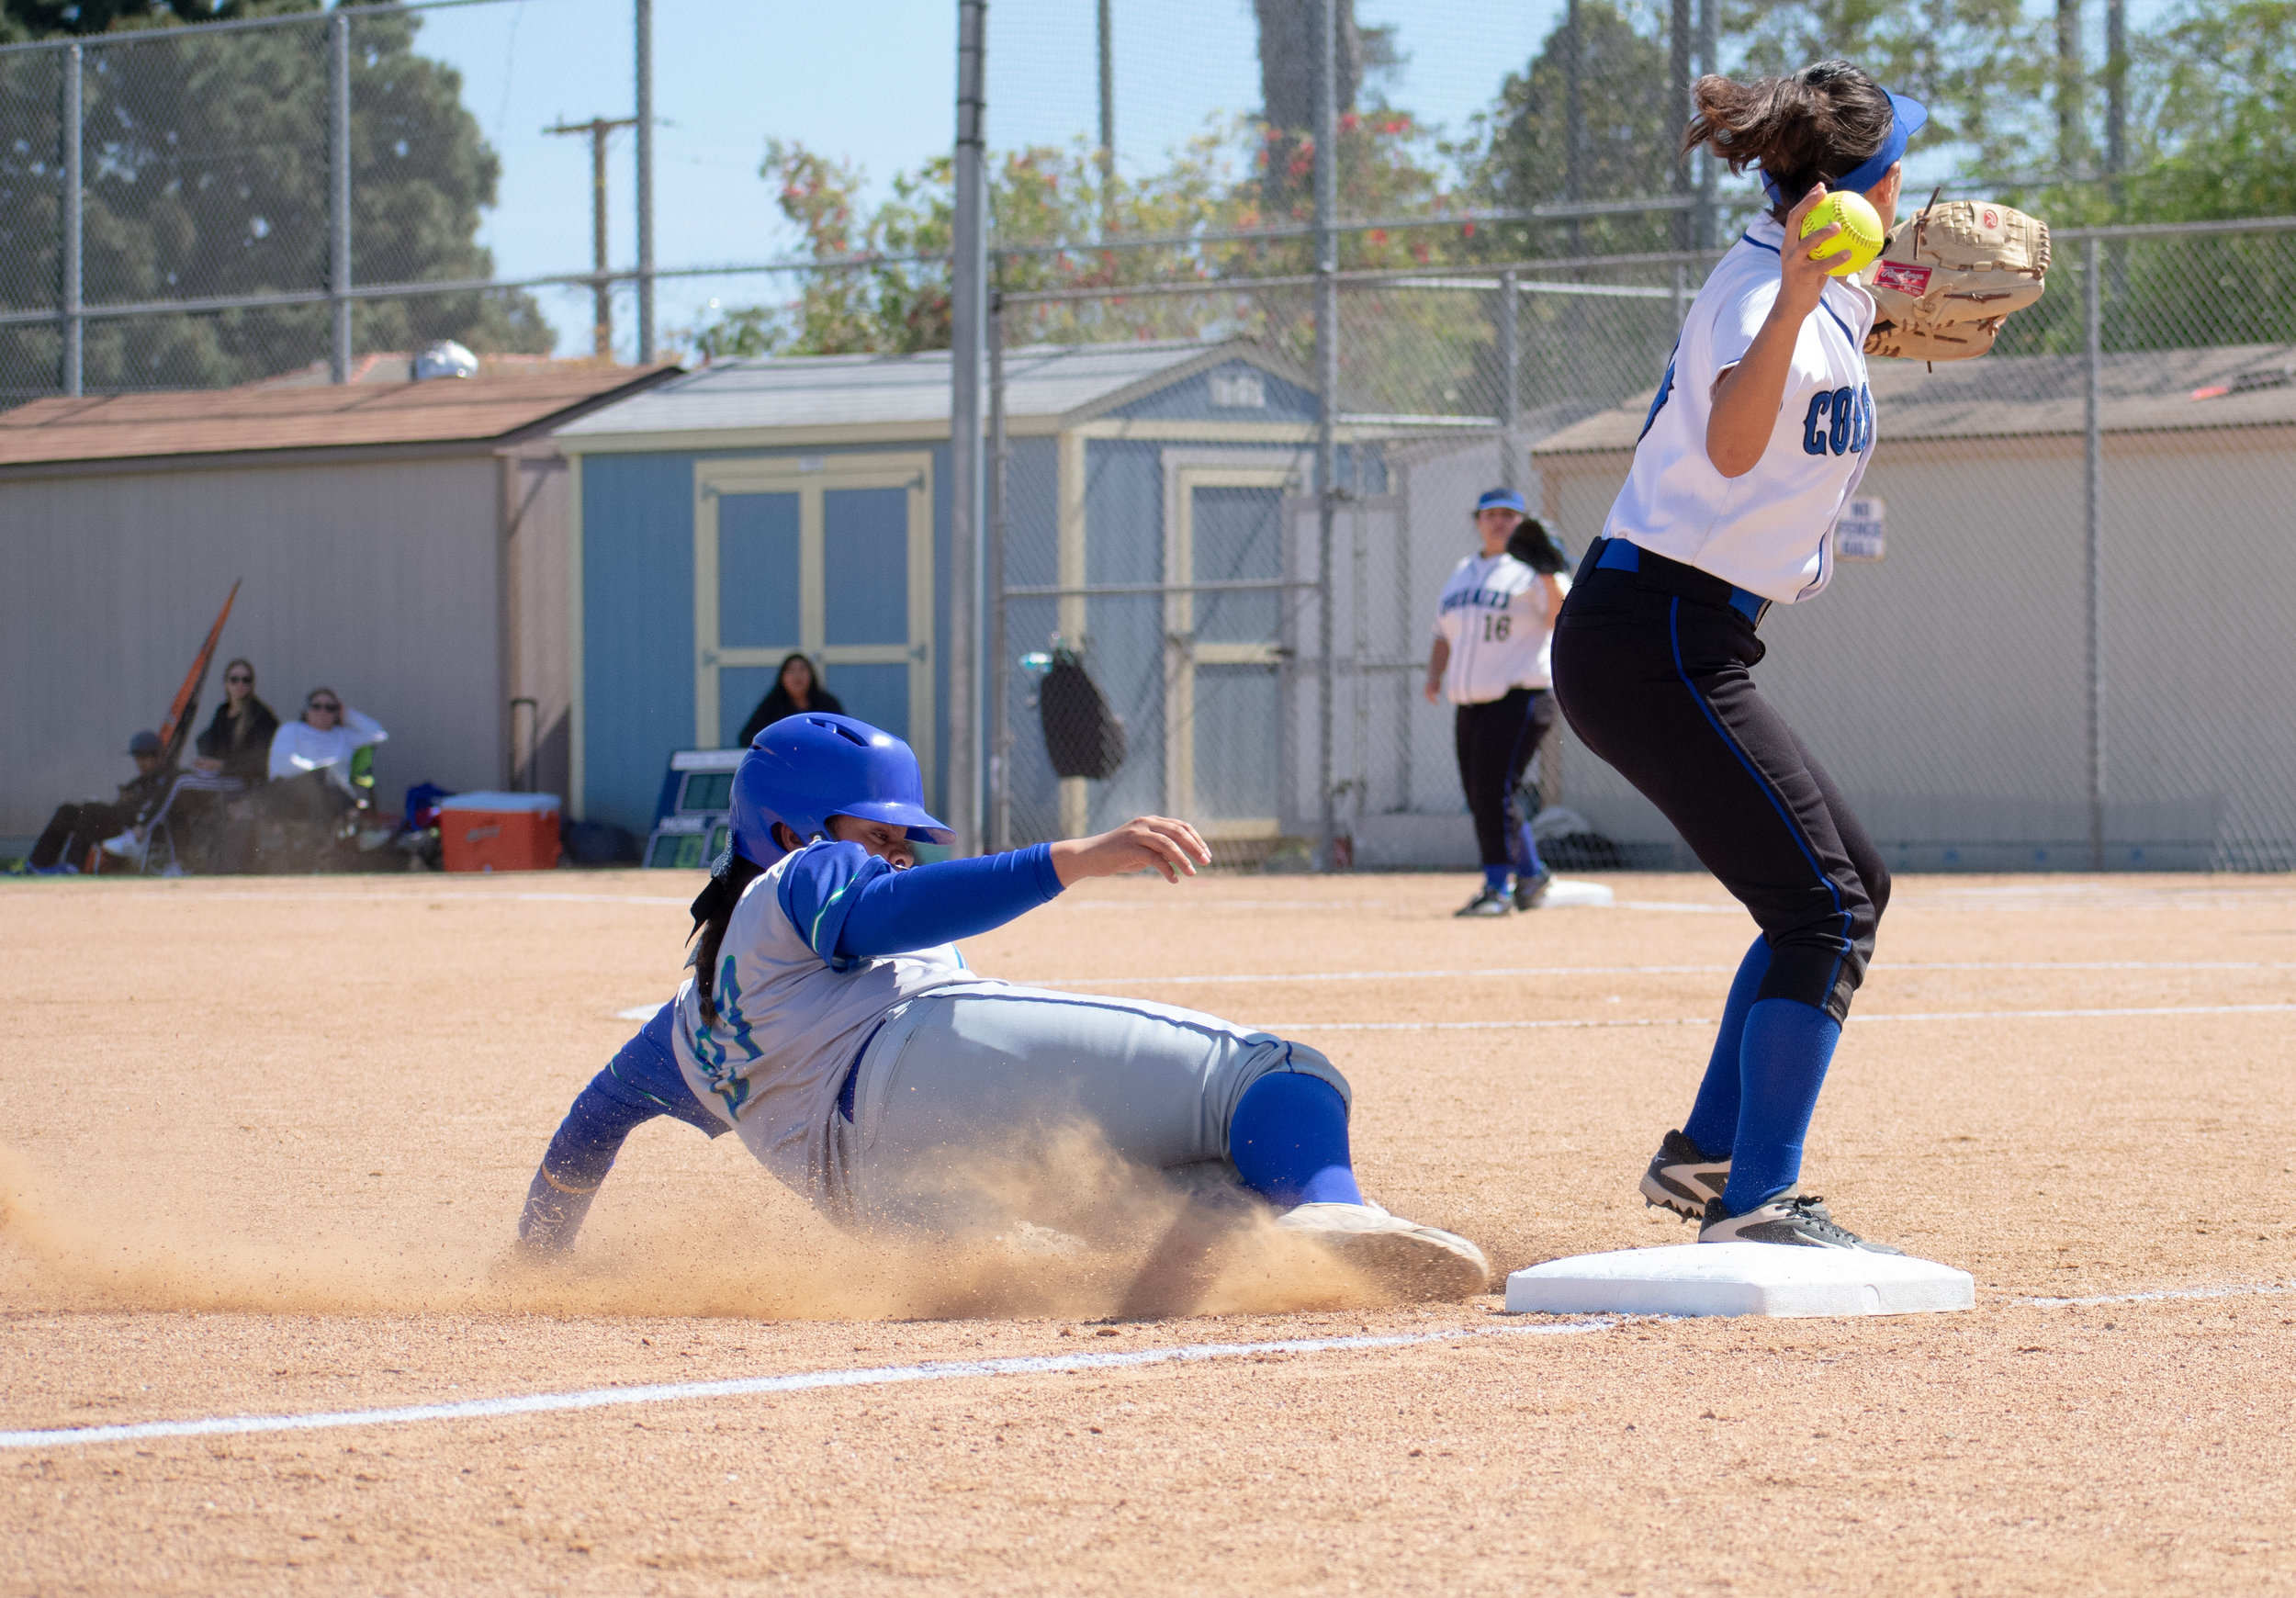  After forcing the Oxnard Condors out of third base, Santa Monica College Corsair Briana Osuna (#10) throws the ball to first to get the next runner out ball in a softball on Thursday, April 19, 2018 at the John Adams Middle School Field in Santa Mon